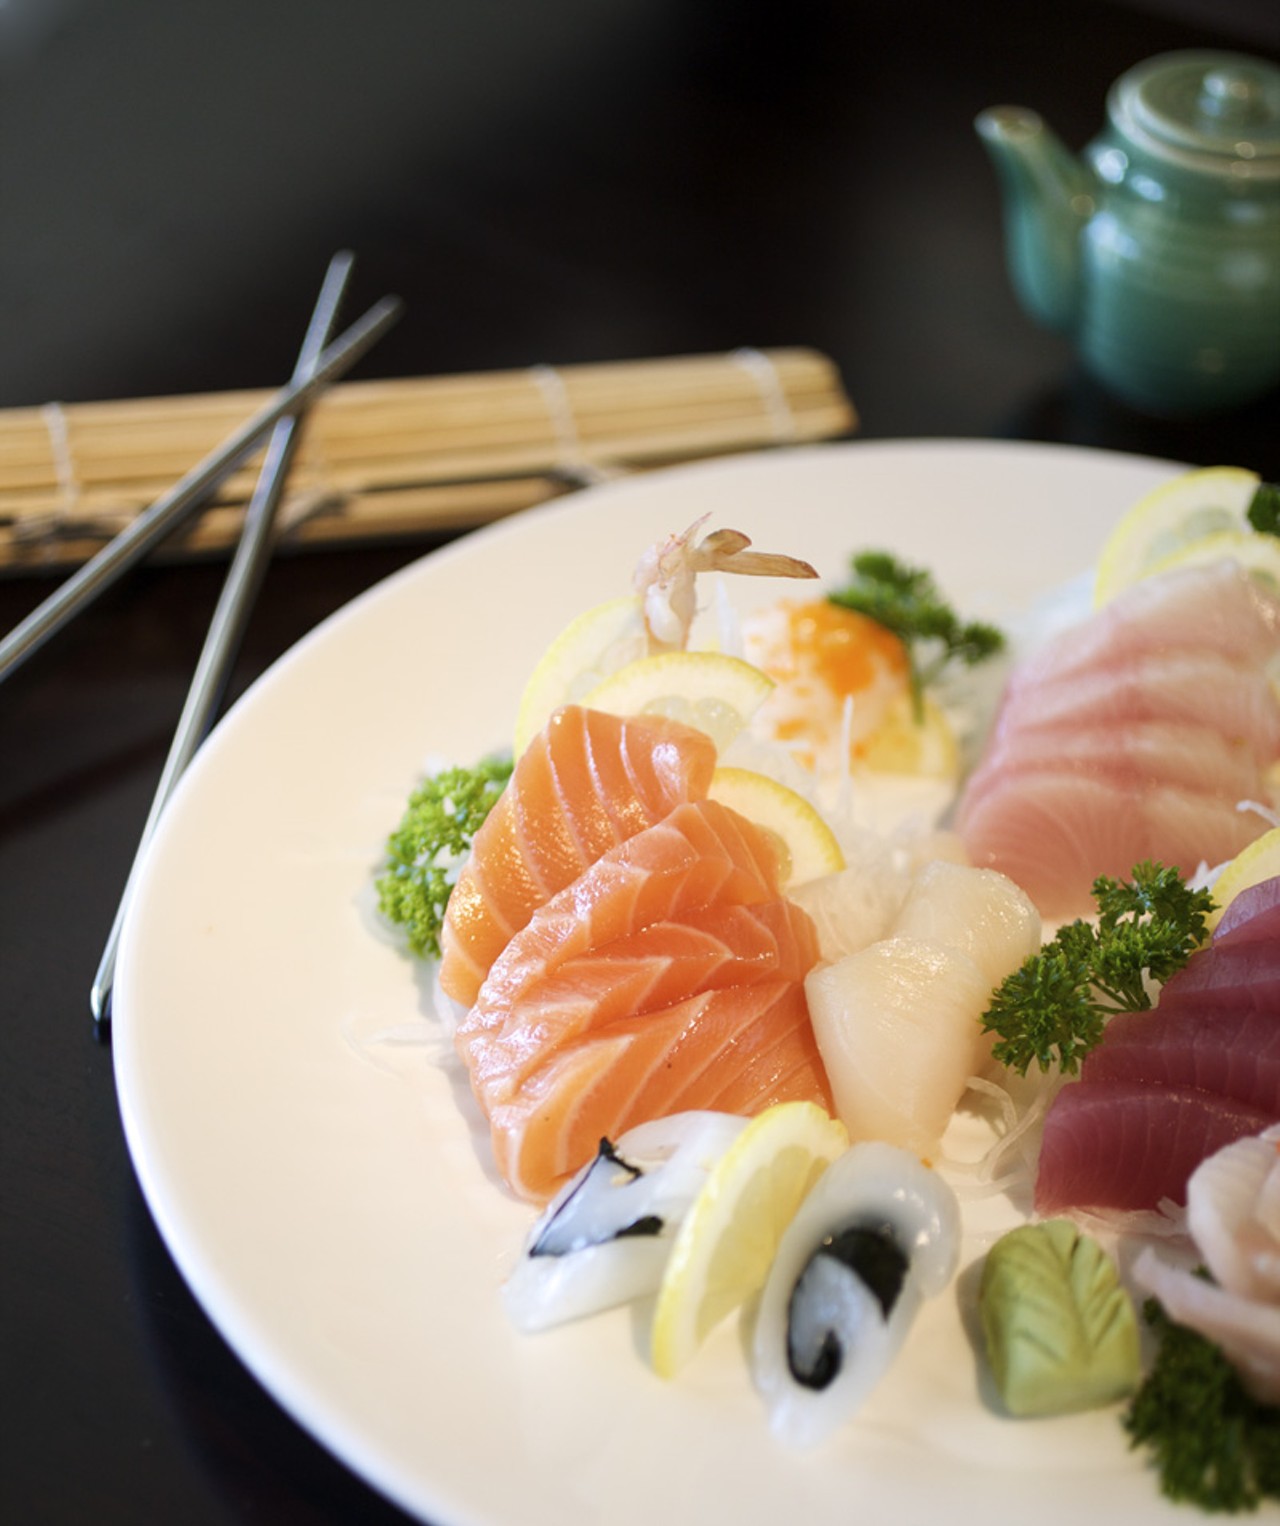 A Sashimi plate that included salmon, tuna, squid, shrimp, crab and red snapper is ordered a la carte.